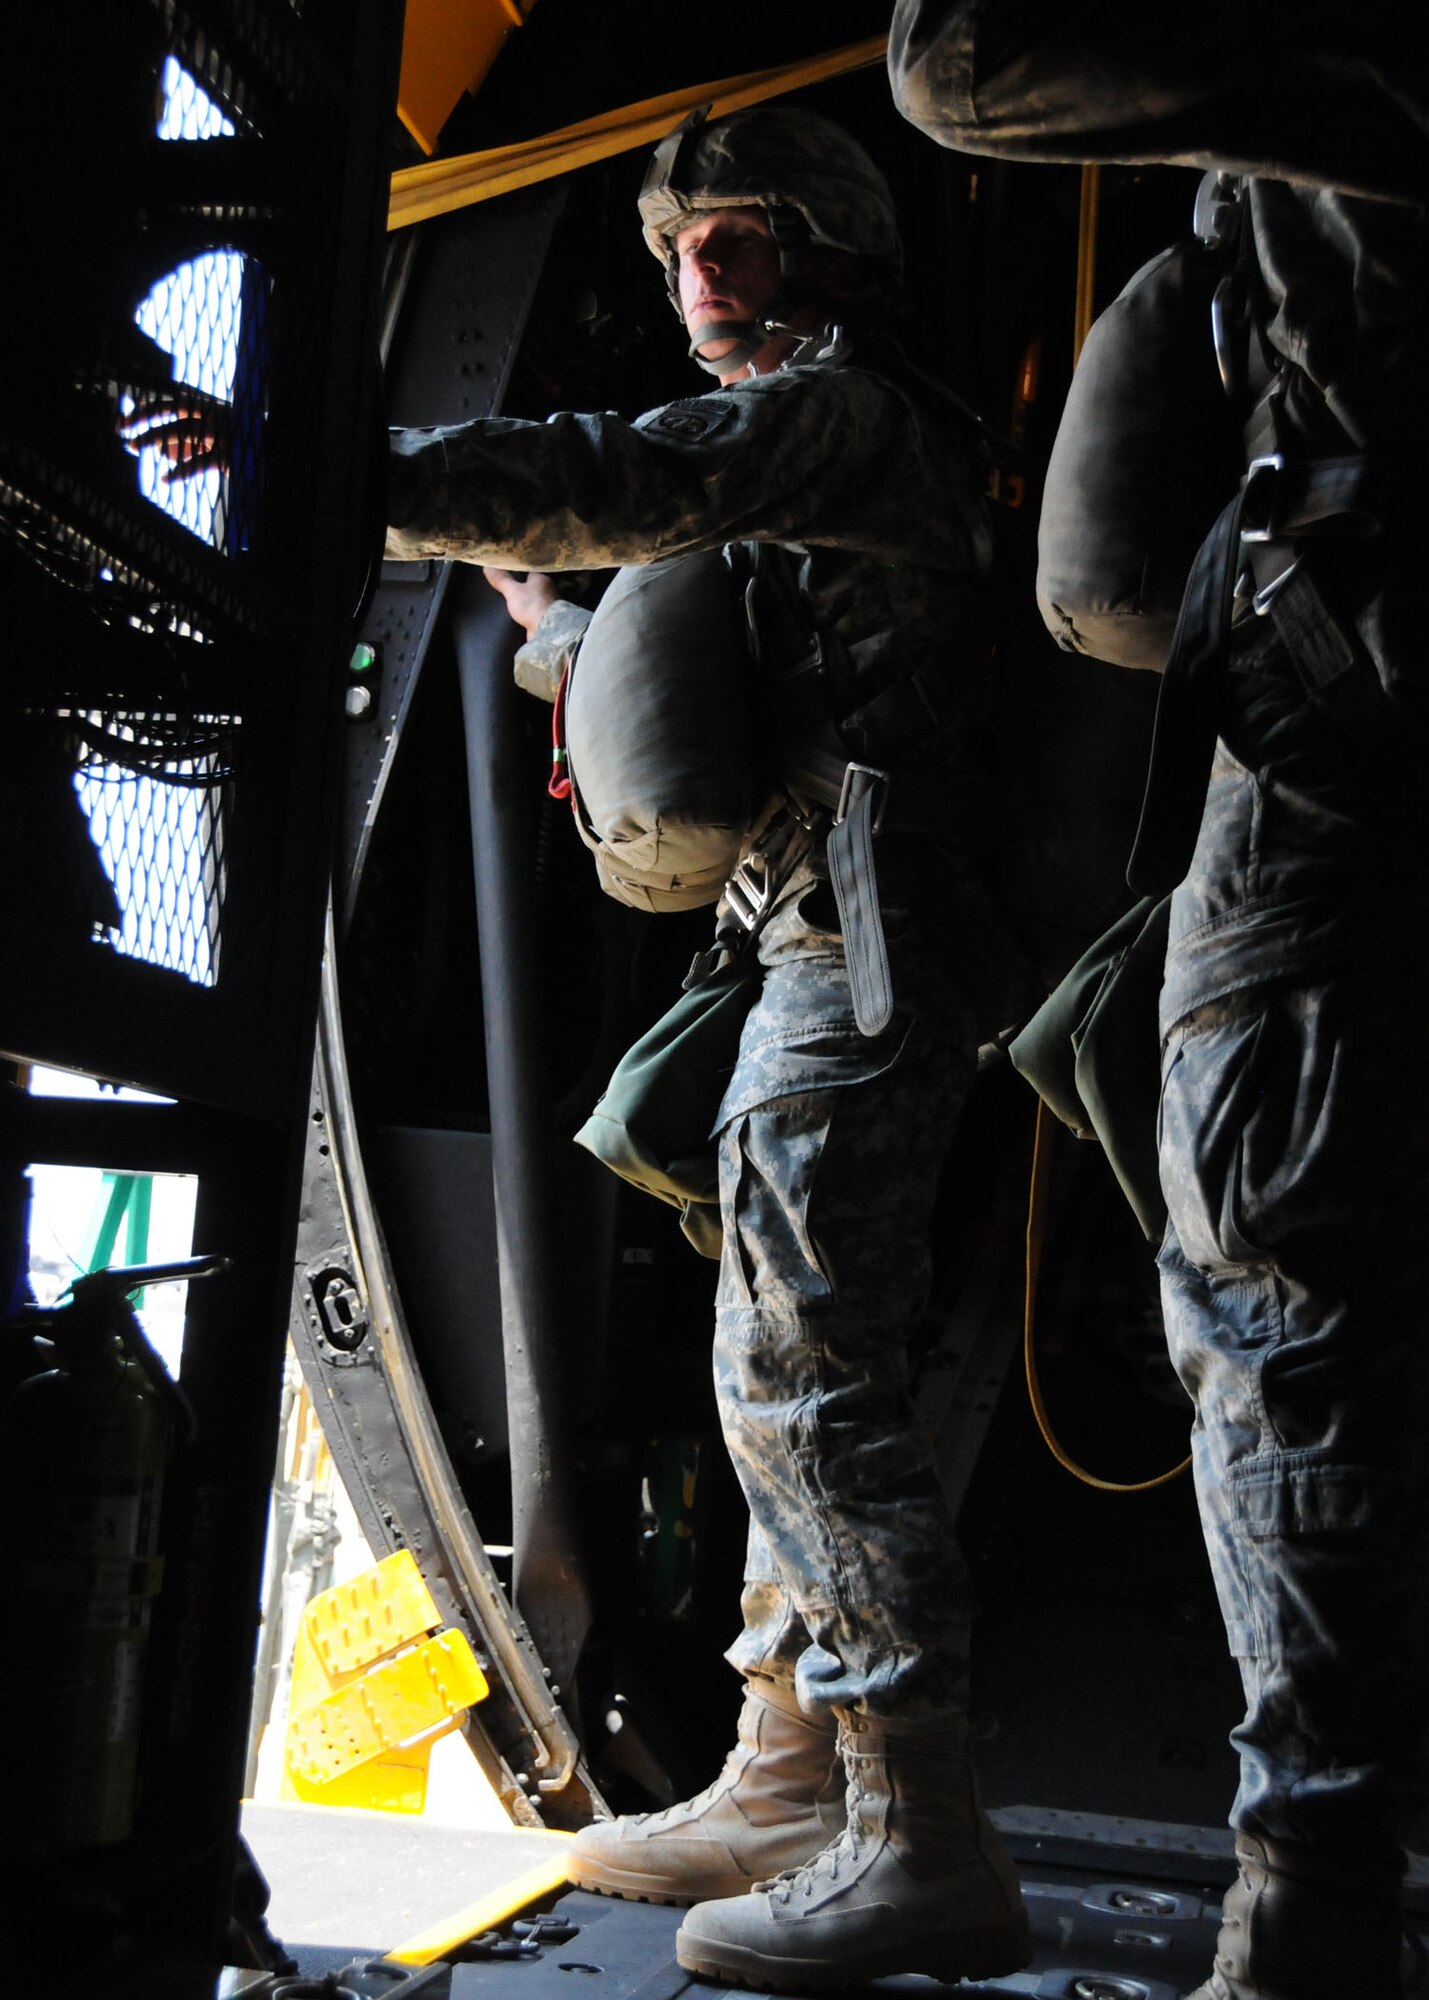 Will Illg, an actor, braces himself in the open door of an MC-130E aircraft for a simulated jump on the flight line at Duke Field, Fla., June 14. The production company, WILL Interactive, started work on a choose-your-own-adventure film for Department of Defense jumpmaster training at Fort Benning, Ga., with help from members from the U.S. Army Airborne School. However, when the crew needed a C-130 in portions of the video, the 919th Special Operations Wing offered to support the project at Duke Field  June 13-15. (U.S. Air Force photo/Tech. Sgt. Cheryl Foster)